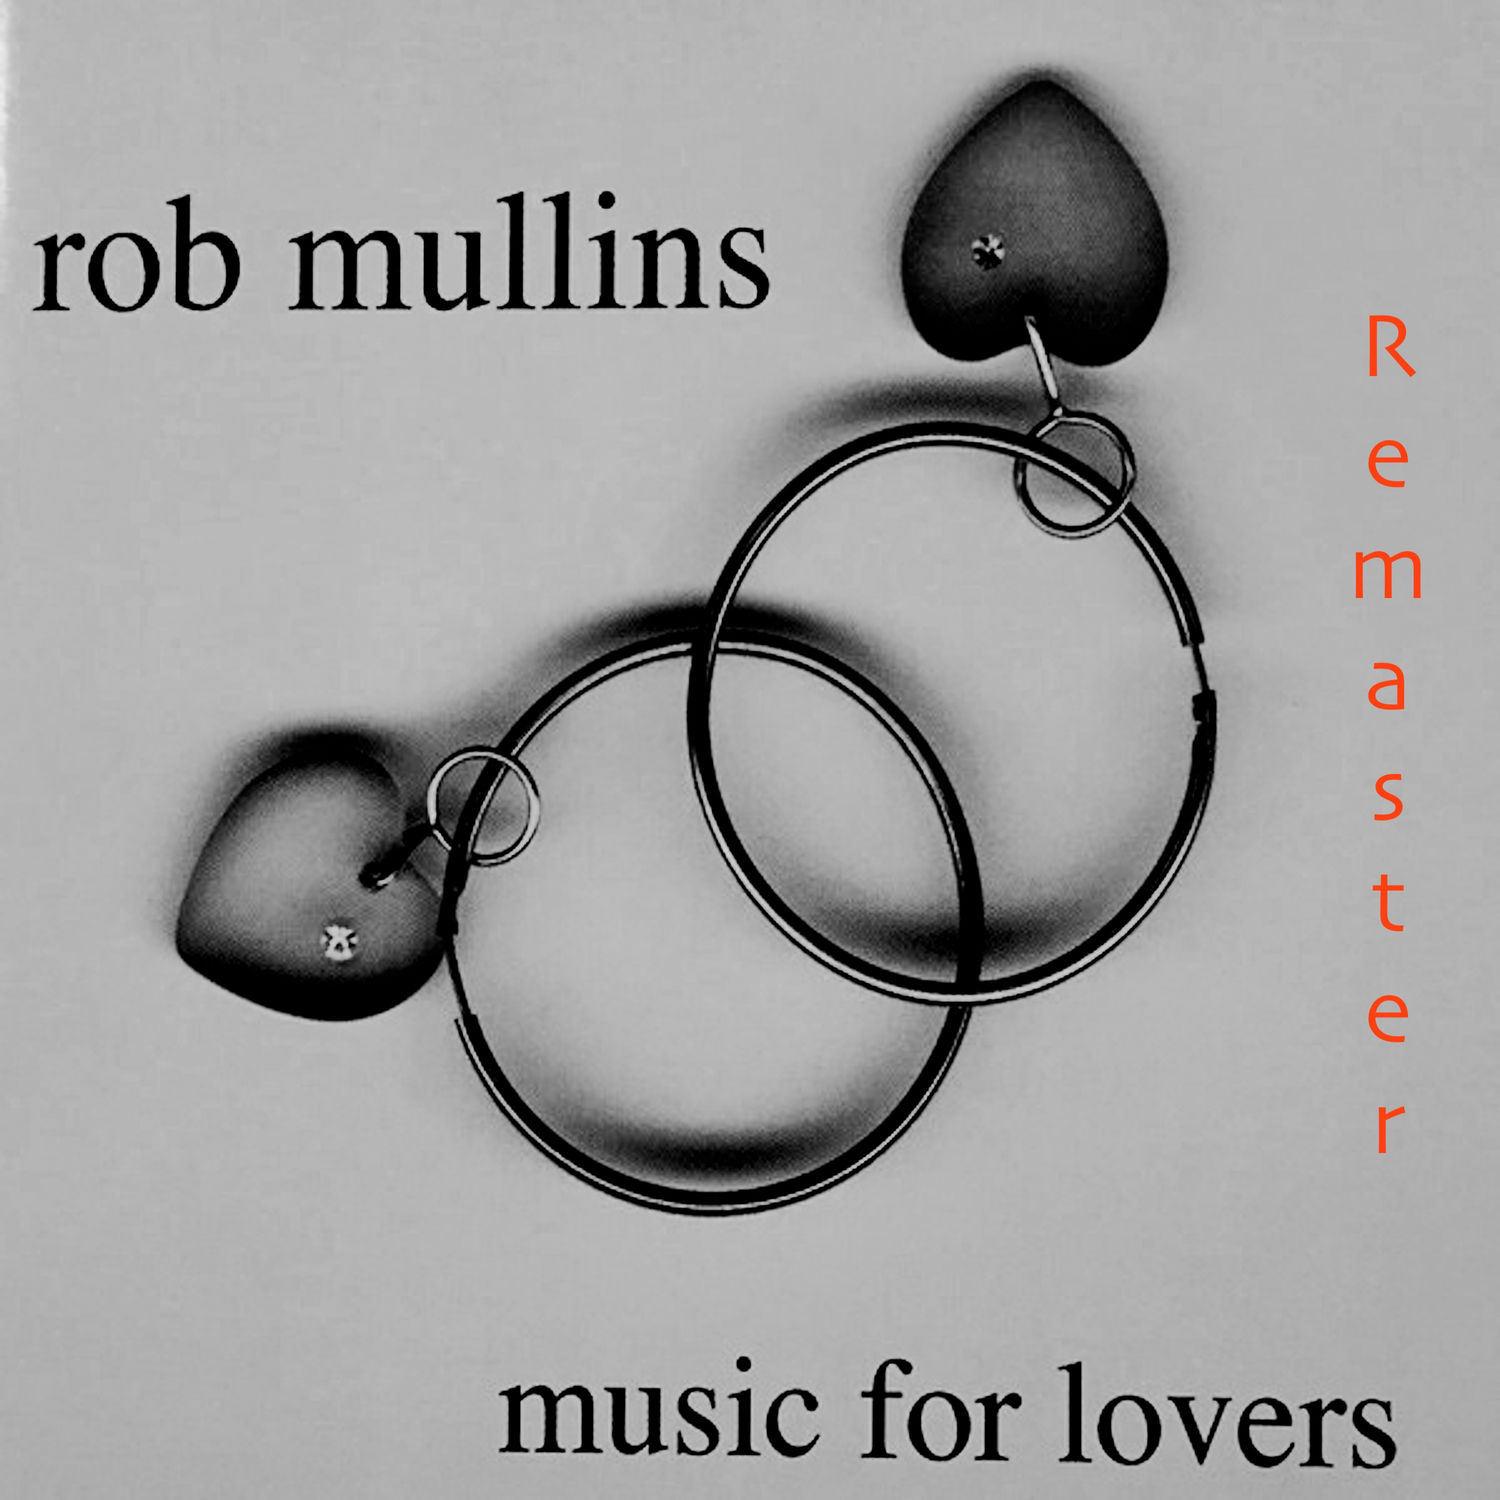 Rob Mullins – Music for Lovers (Remaster) (2021) [FLAC 24bit/44,1kHz]